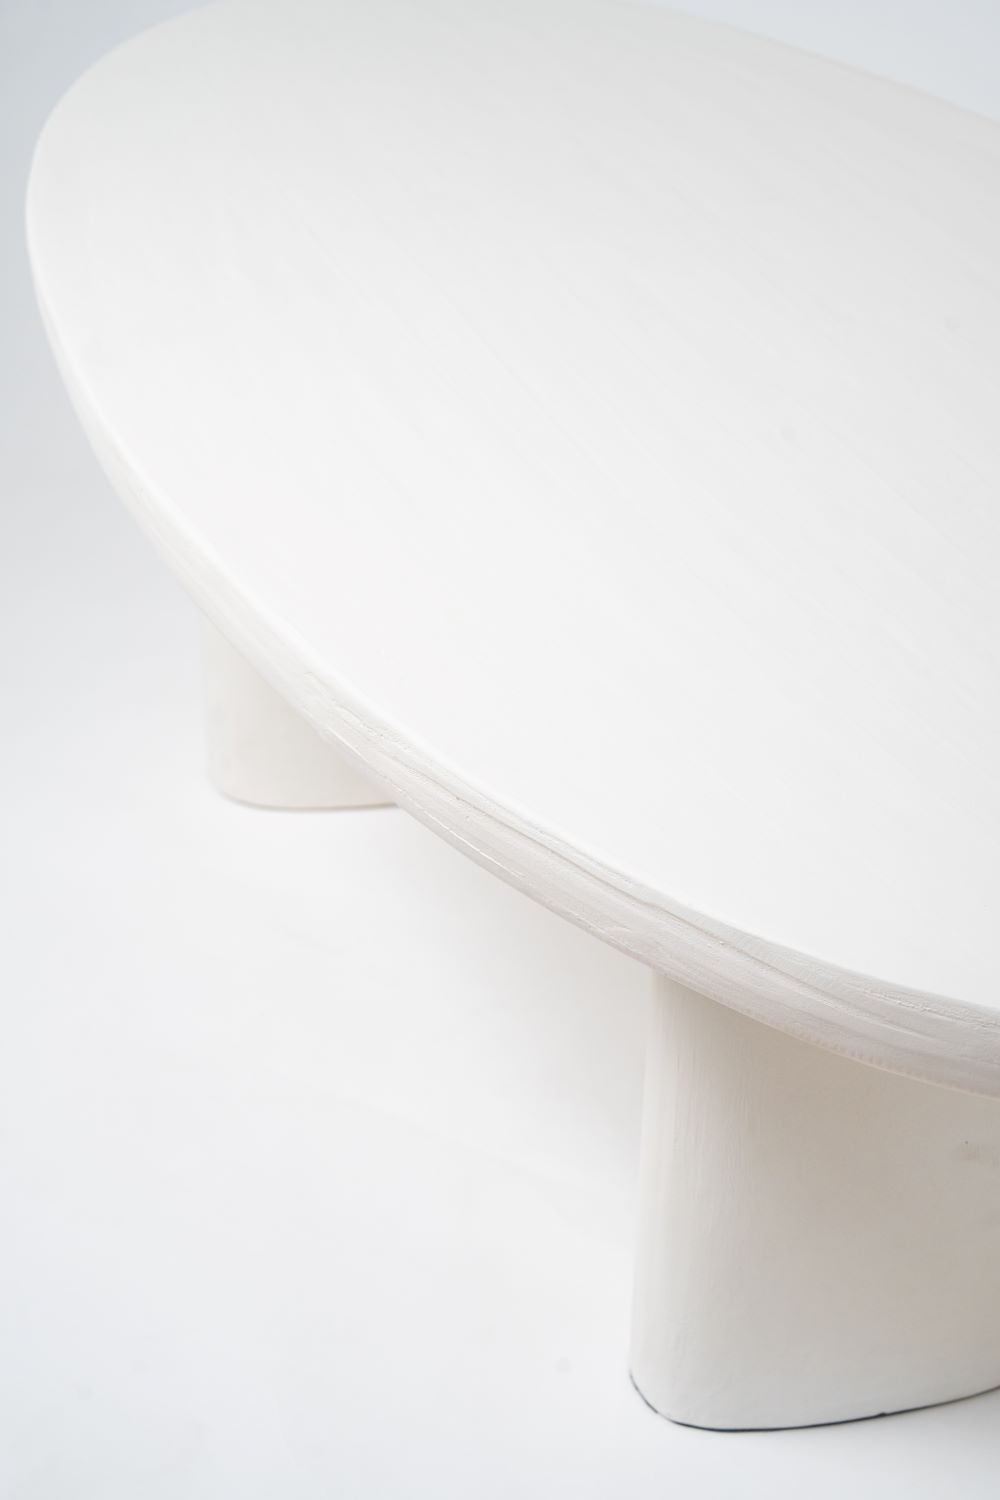 Oval top white coffee table (122X65X40 cm)